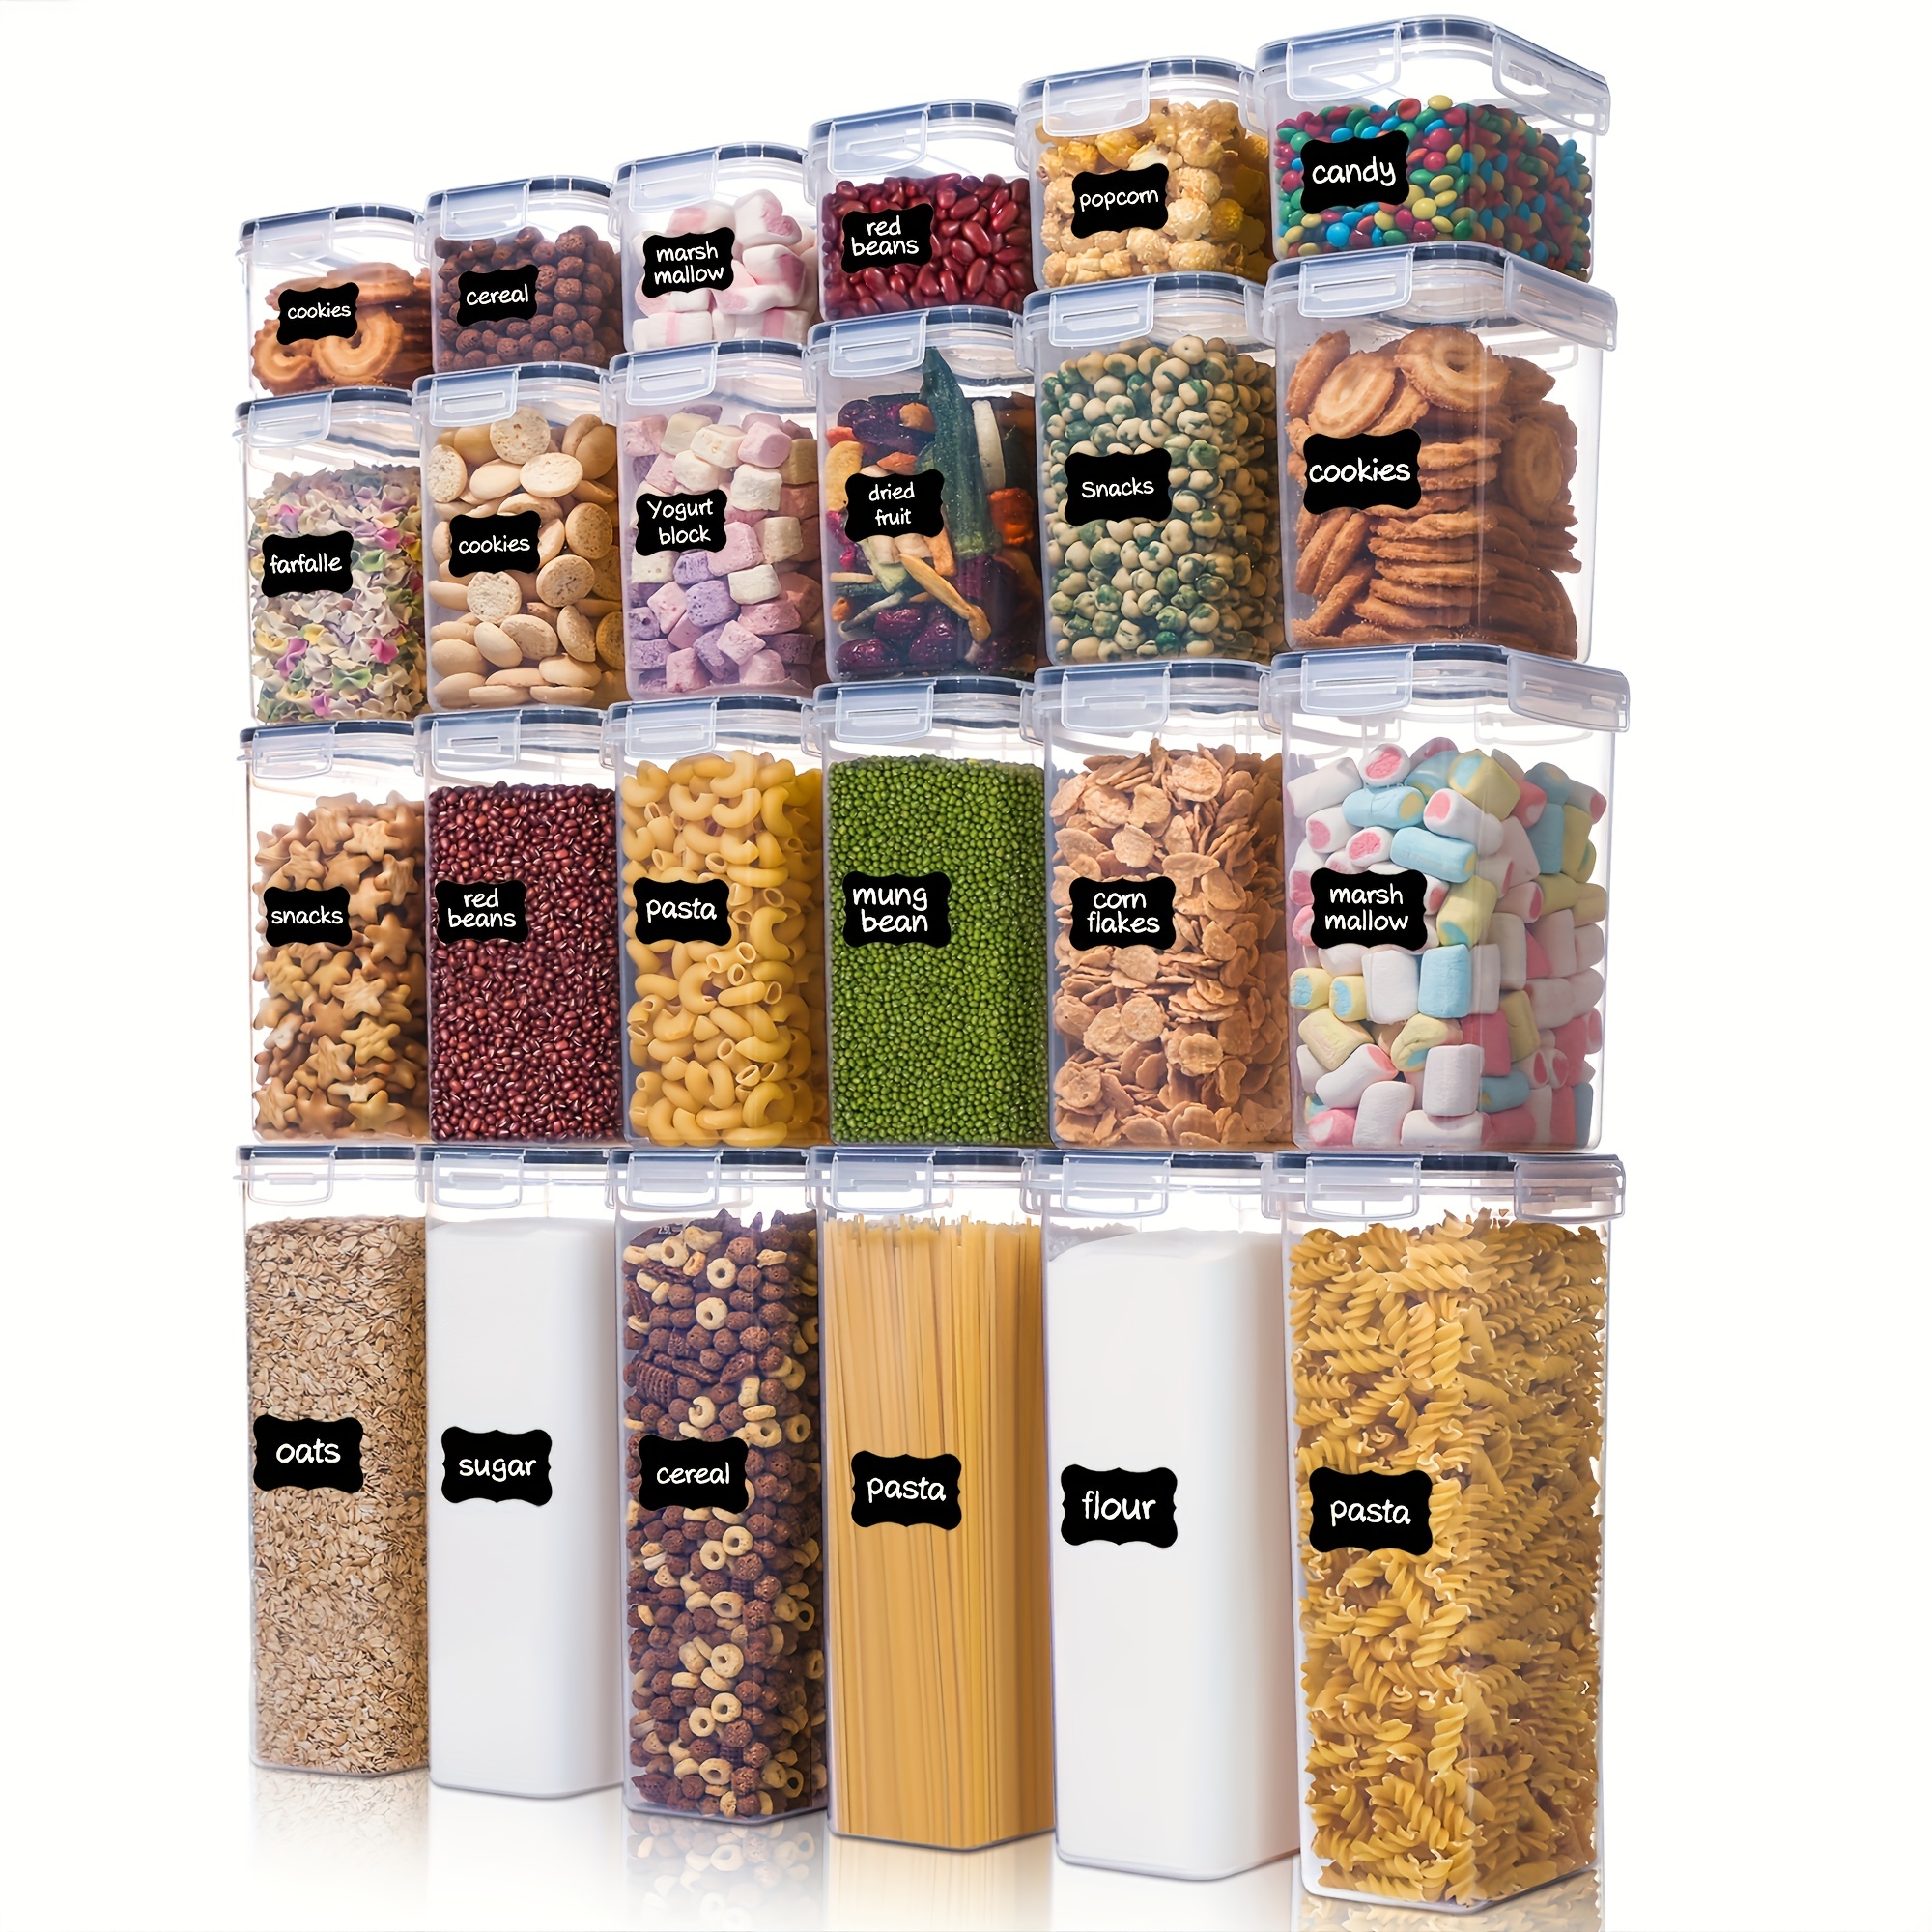 

24pcs, Airtight Food Storage Containers With Lids, Plastic Kitchen And Pantry Organization Canisters For Cereal, Dry Food, Flour And Sugar, Bpa Free, Includes 24 Labels